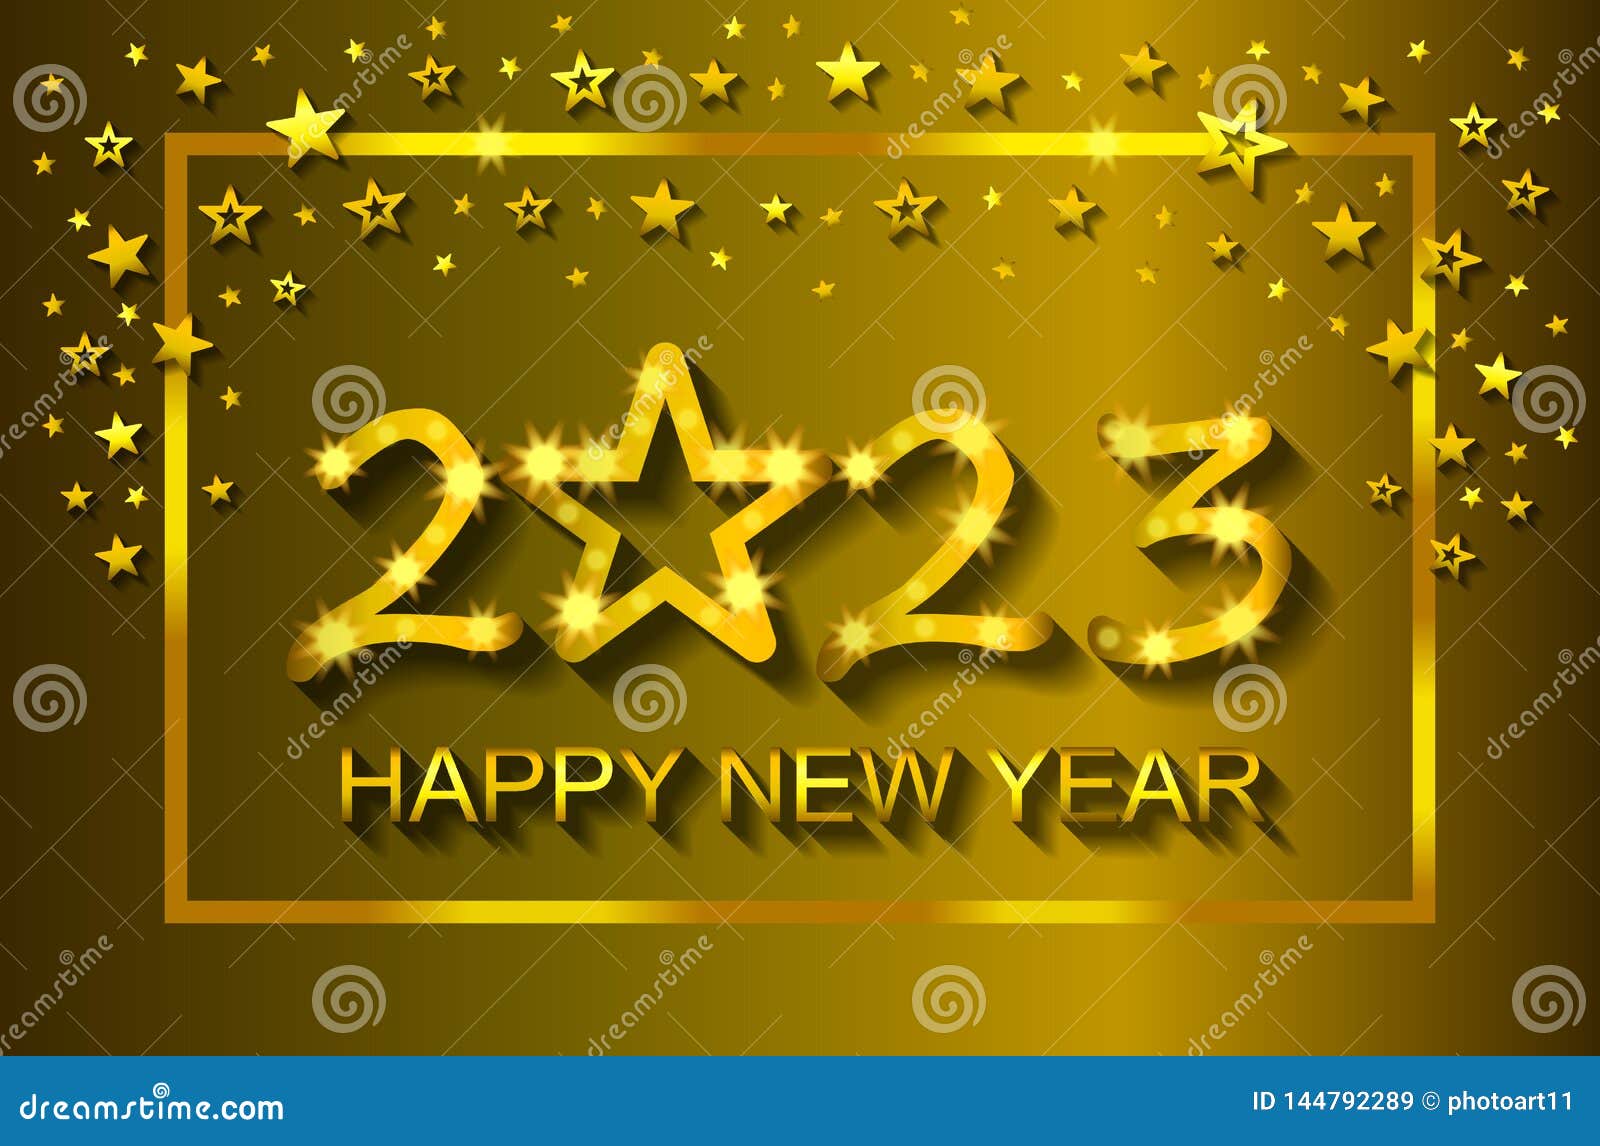 Happy New Year 2023 - Greeting Card, Flyer, Invitation - Vector Stock Vector - Illustration of